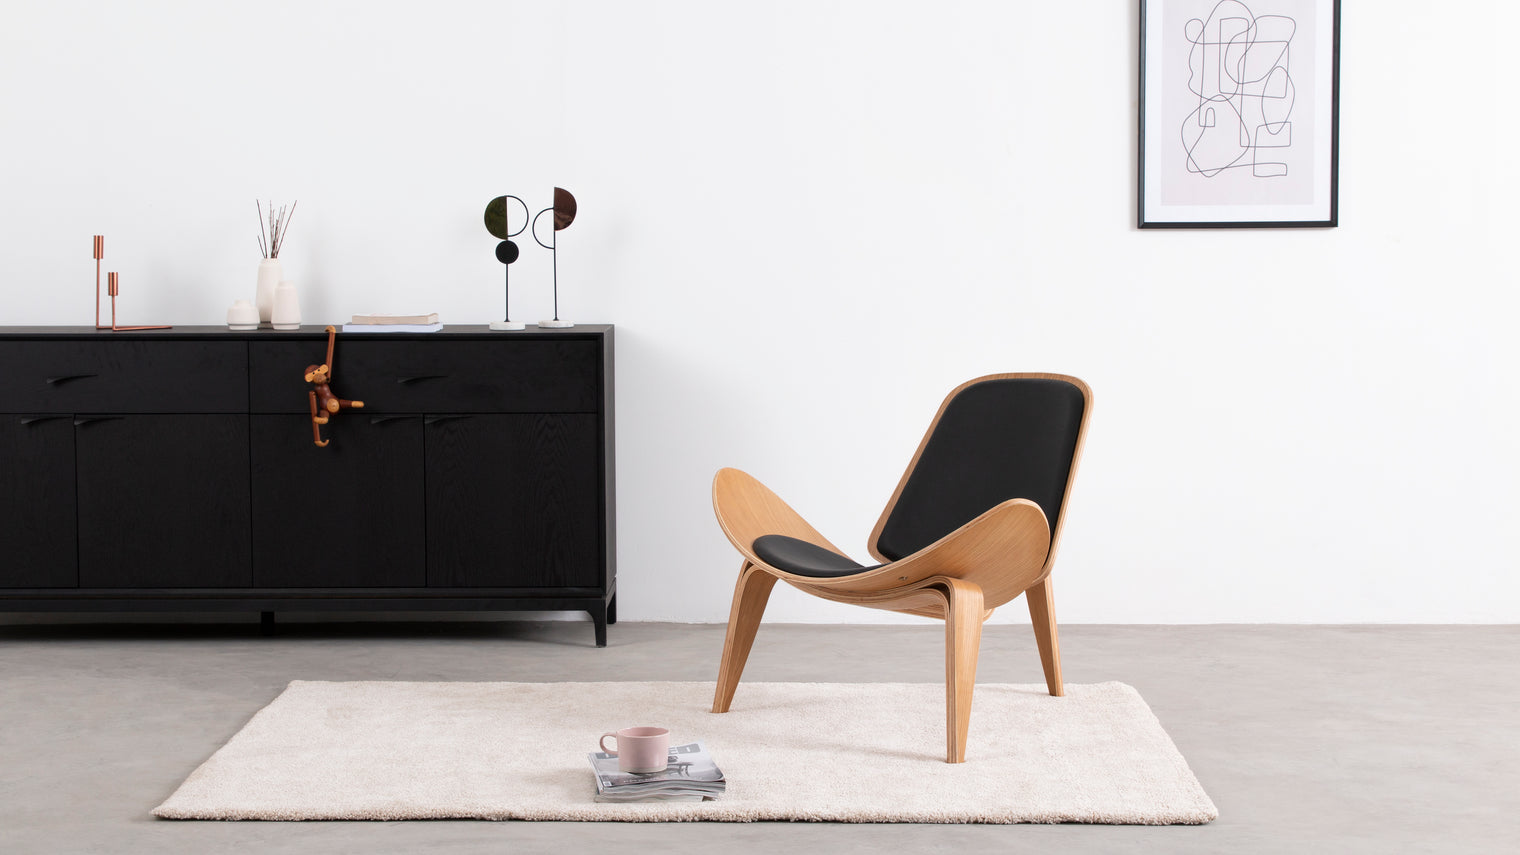 A unique design ahead of its time|The Shell Lounge Chair combines contemporary elements with a futuristic aesthetic. A trio of sleek, hardwearing legs serve as a base for the seemingly weightless, curved seat.
